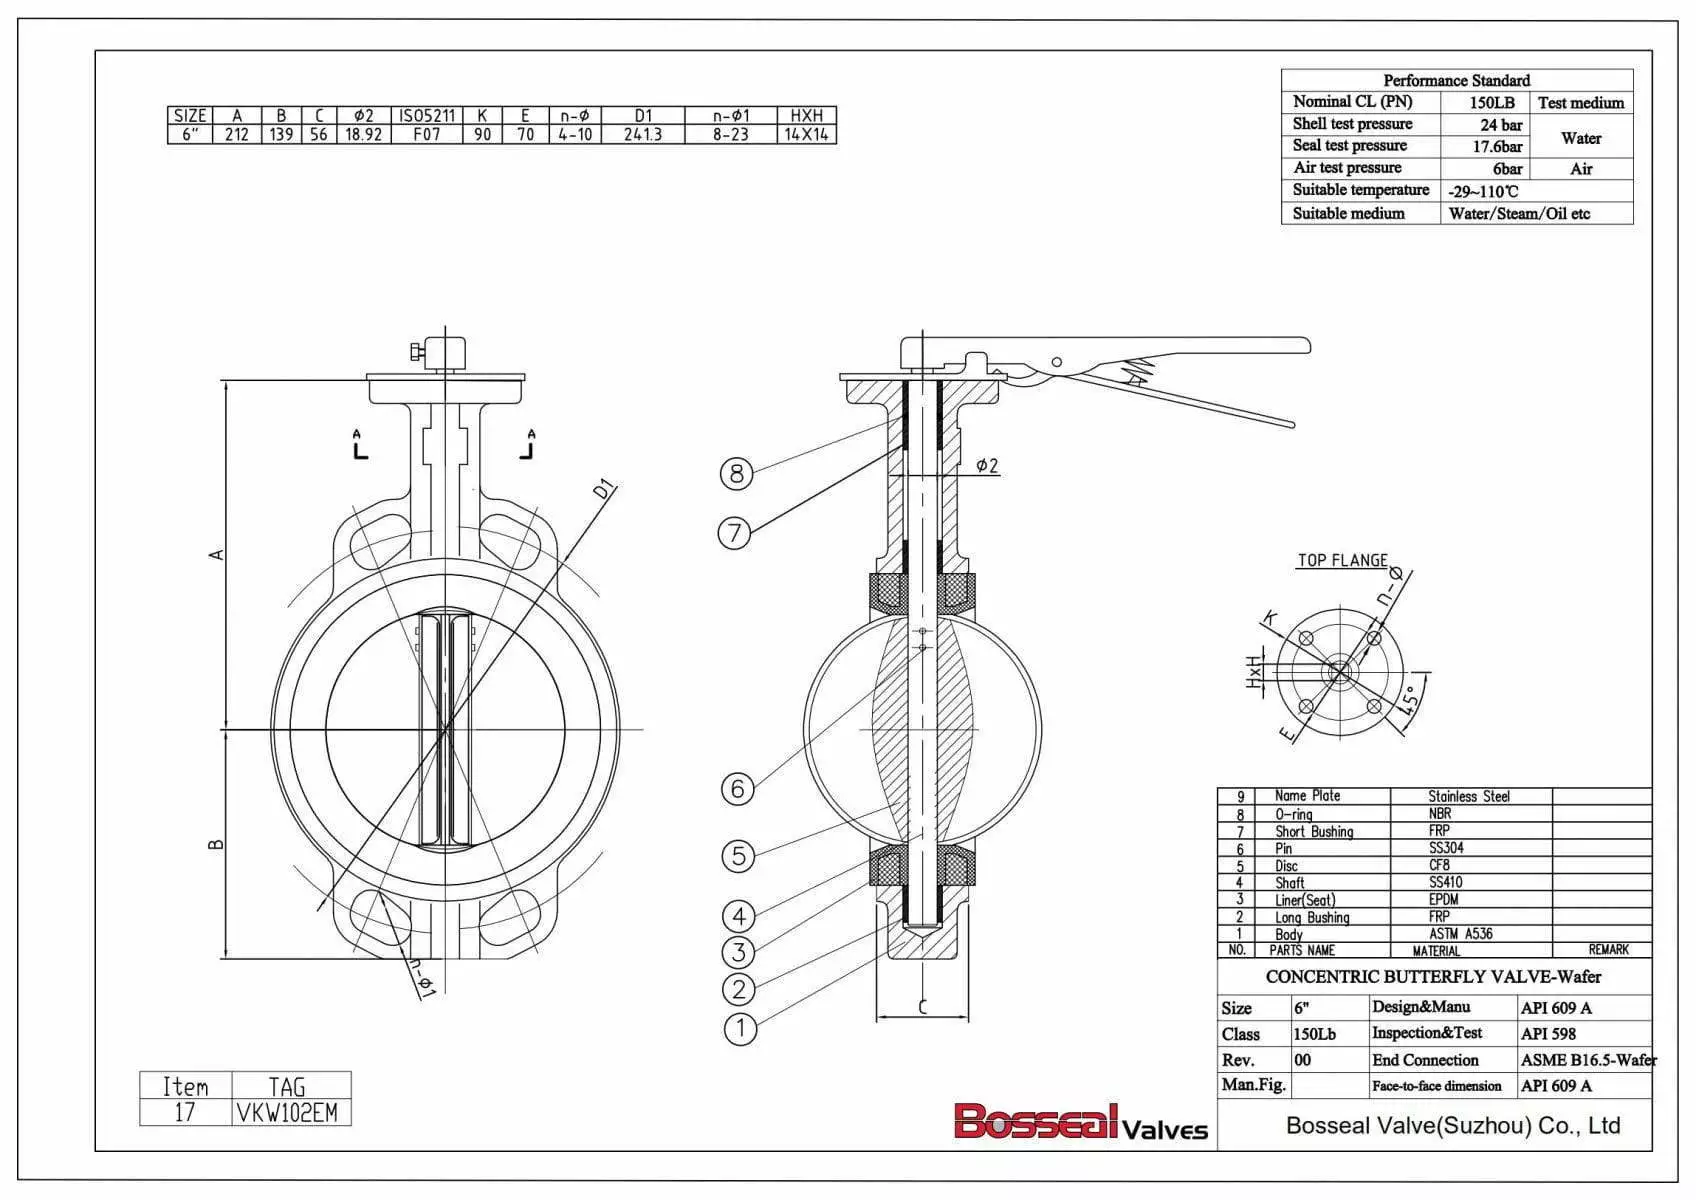 Concentric Butterfly Valve Tech drawing